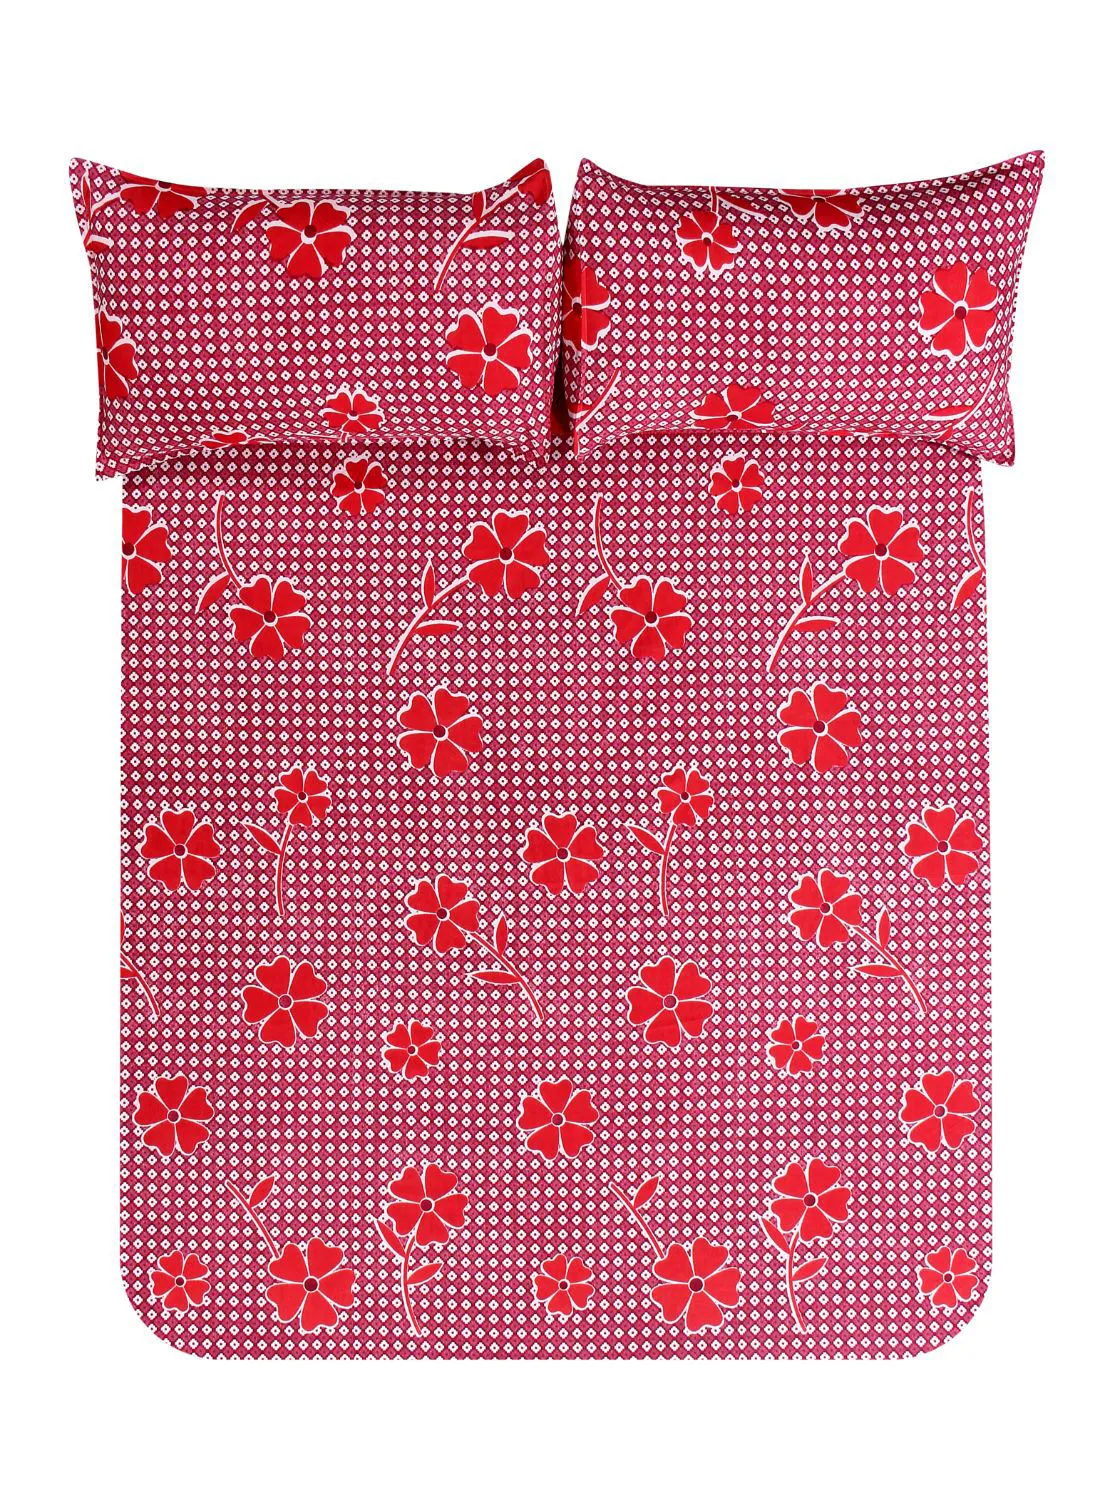 Hometown Fitted Sheet Set Made From 100 GSM 100% Polyester With Pillow Case 50X70 Cm, Bed Linen For 150X200 Cm Twin Size Mattress In Red/ Color